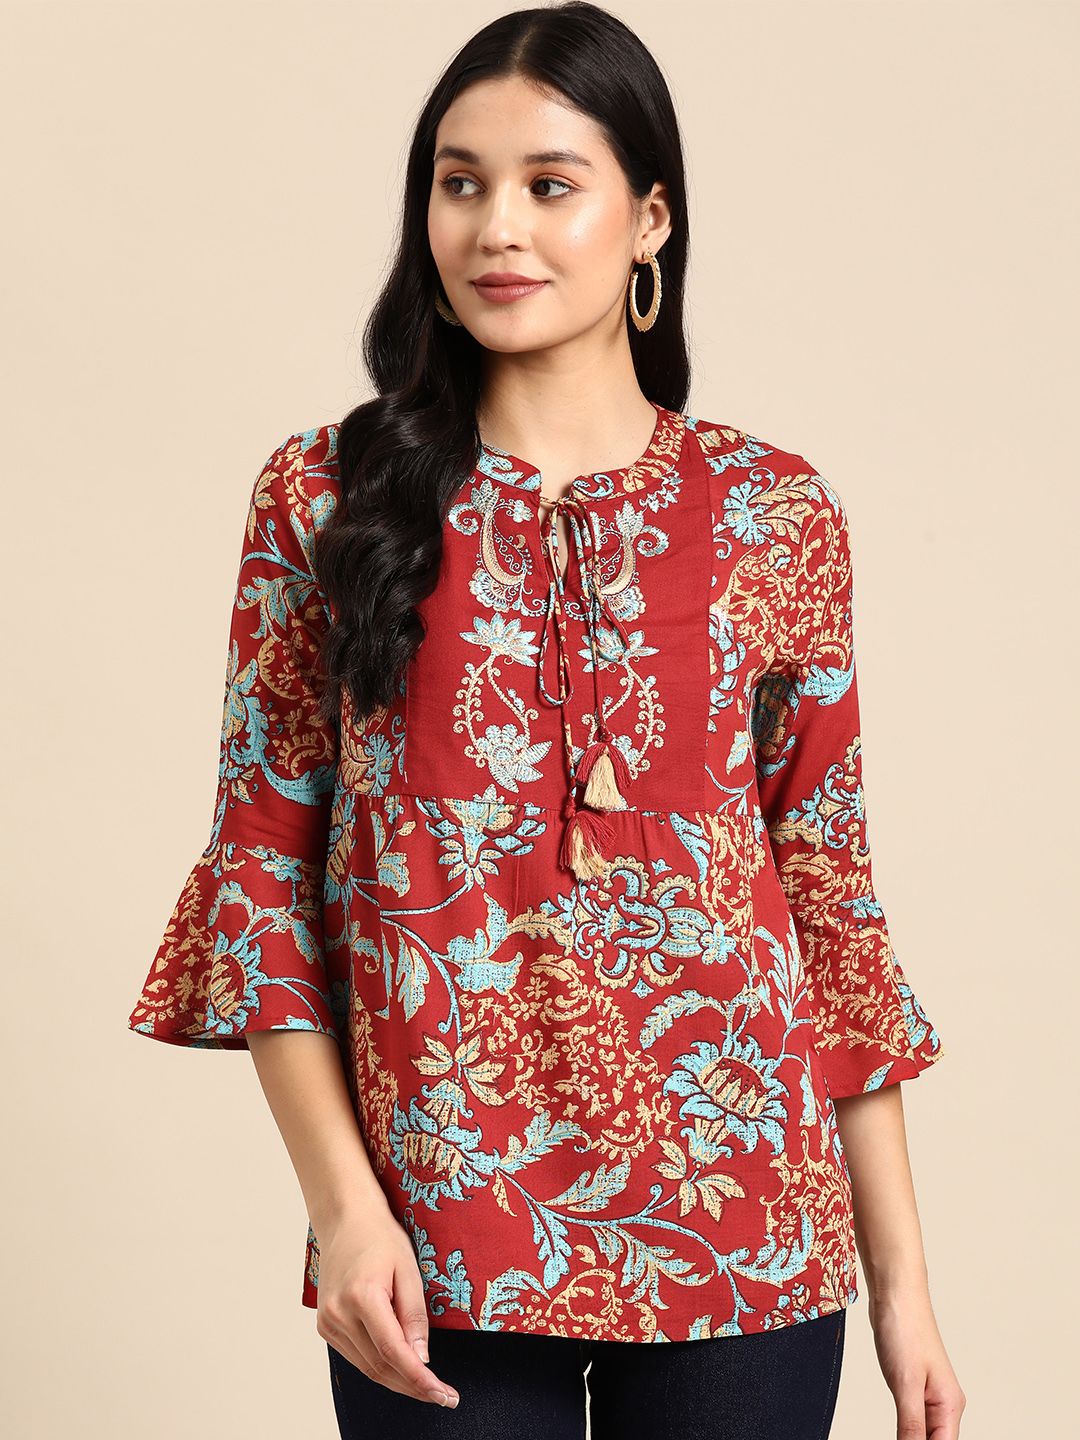 all about you Ethnic Motifs Printed Kurti Price in India